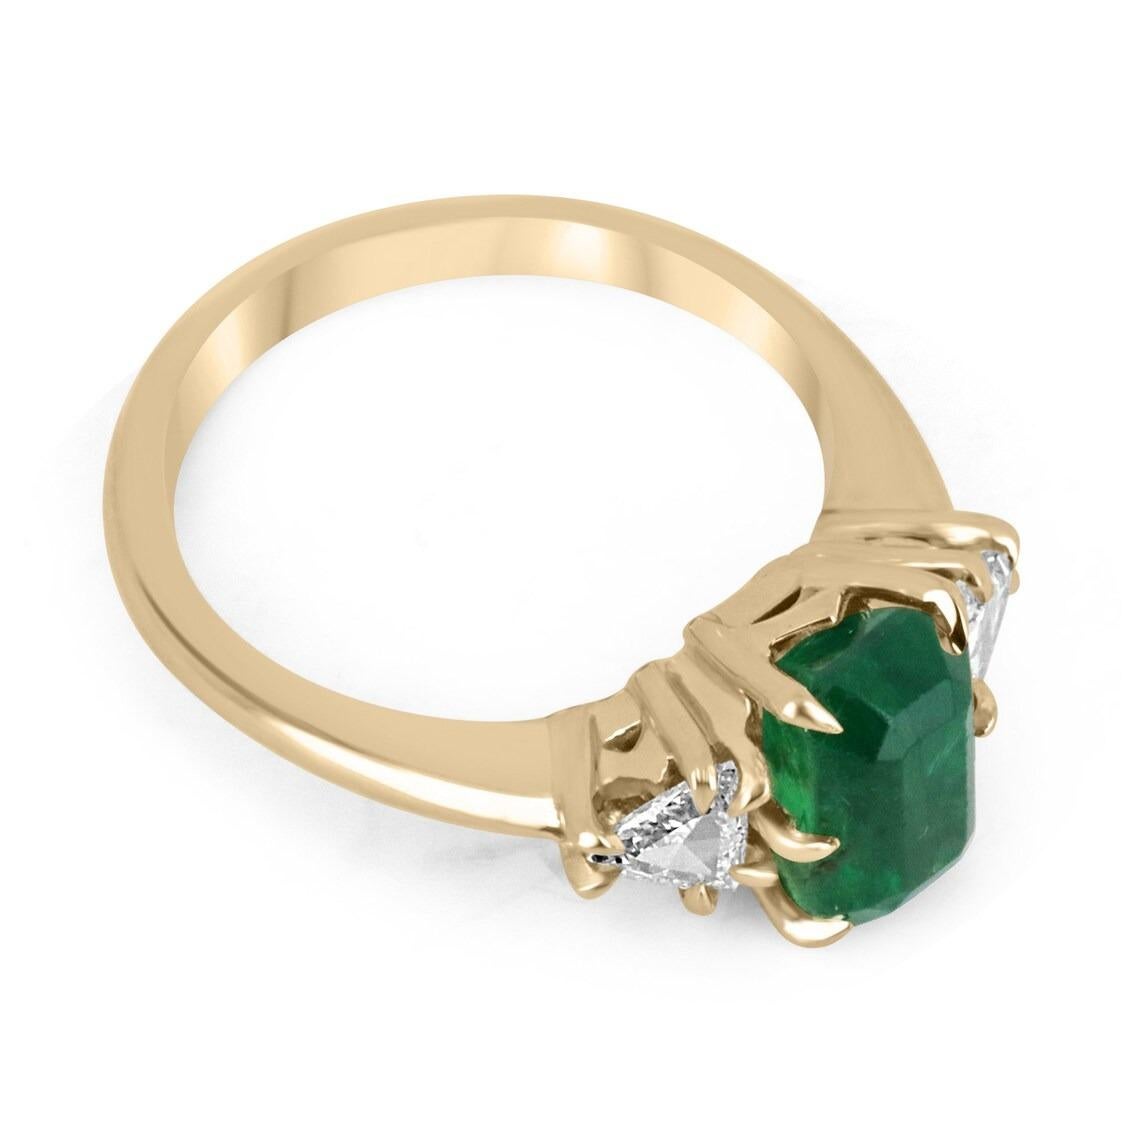 A special emerald and rose cut trillion diamond three-stone ring. Dexterously crafted in gleaming 18K gold this ring features an old-cut emerald from Zambia. Set in a bespoke six-prong setting, this extraordinary emerald has a bright green color and